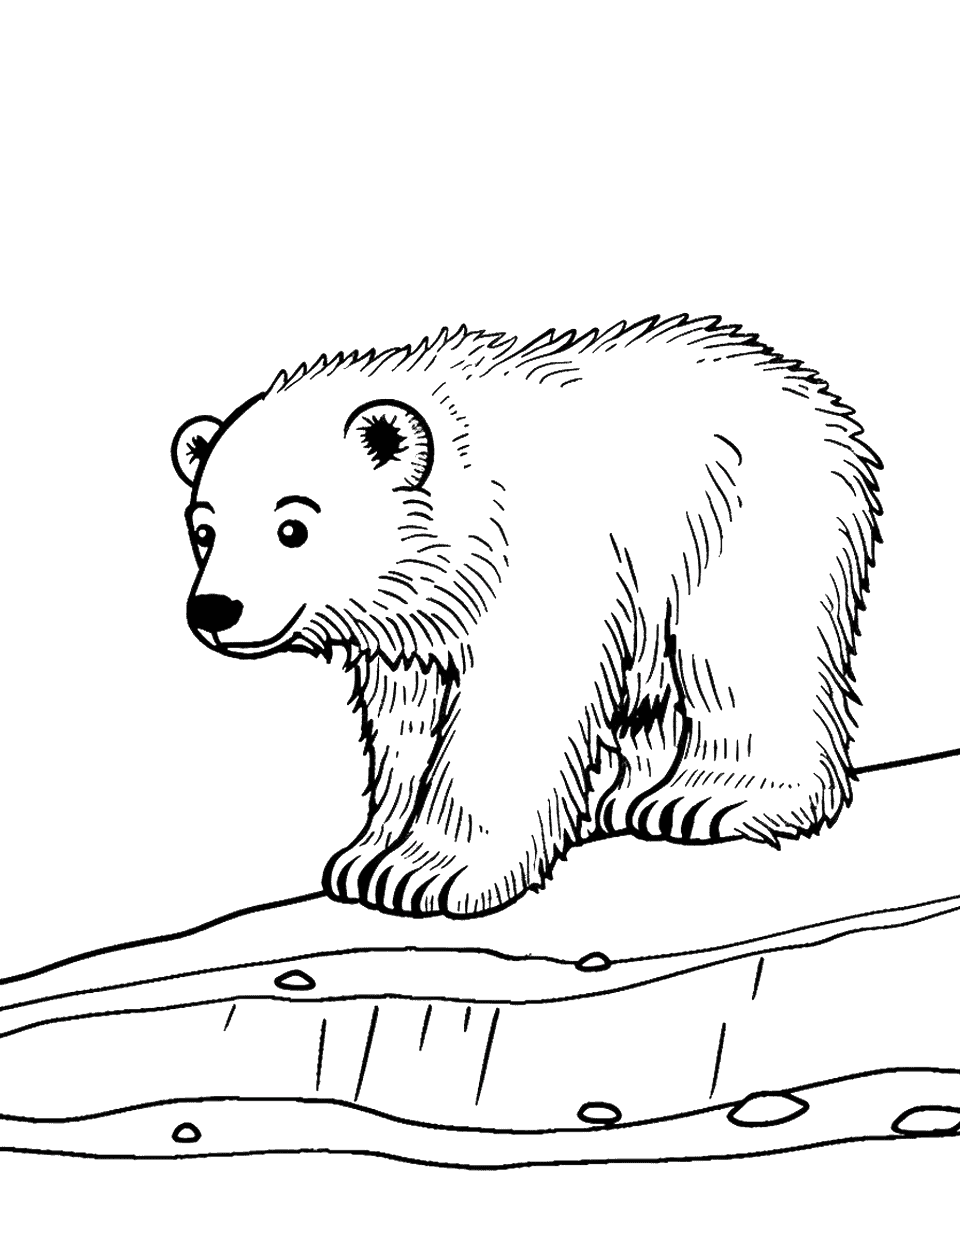 Baby Polar Bear on Ice Coloring Page - A baby polar bear sliding down a small, icy hill.